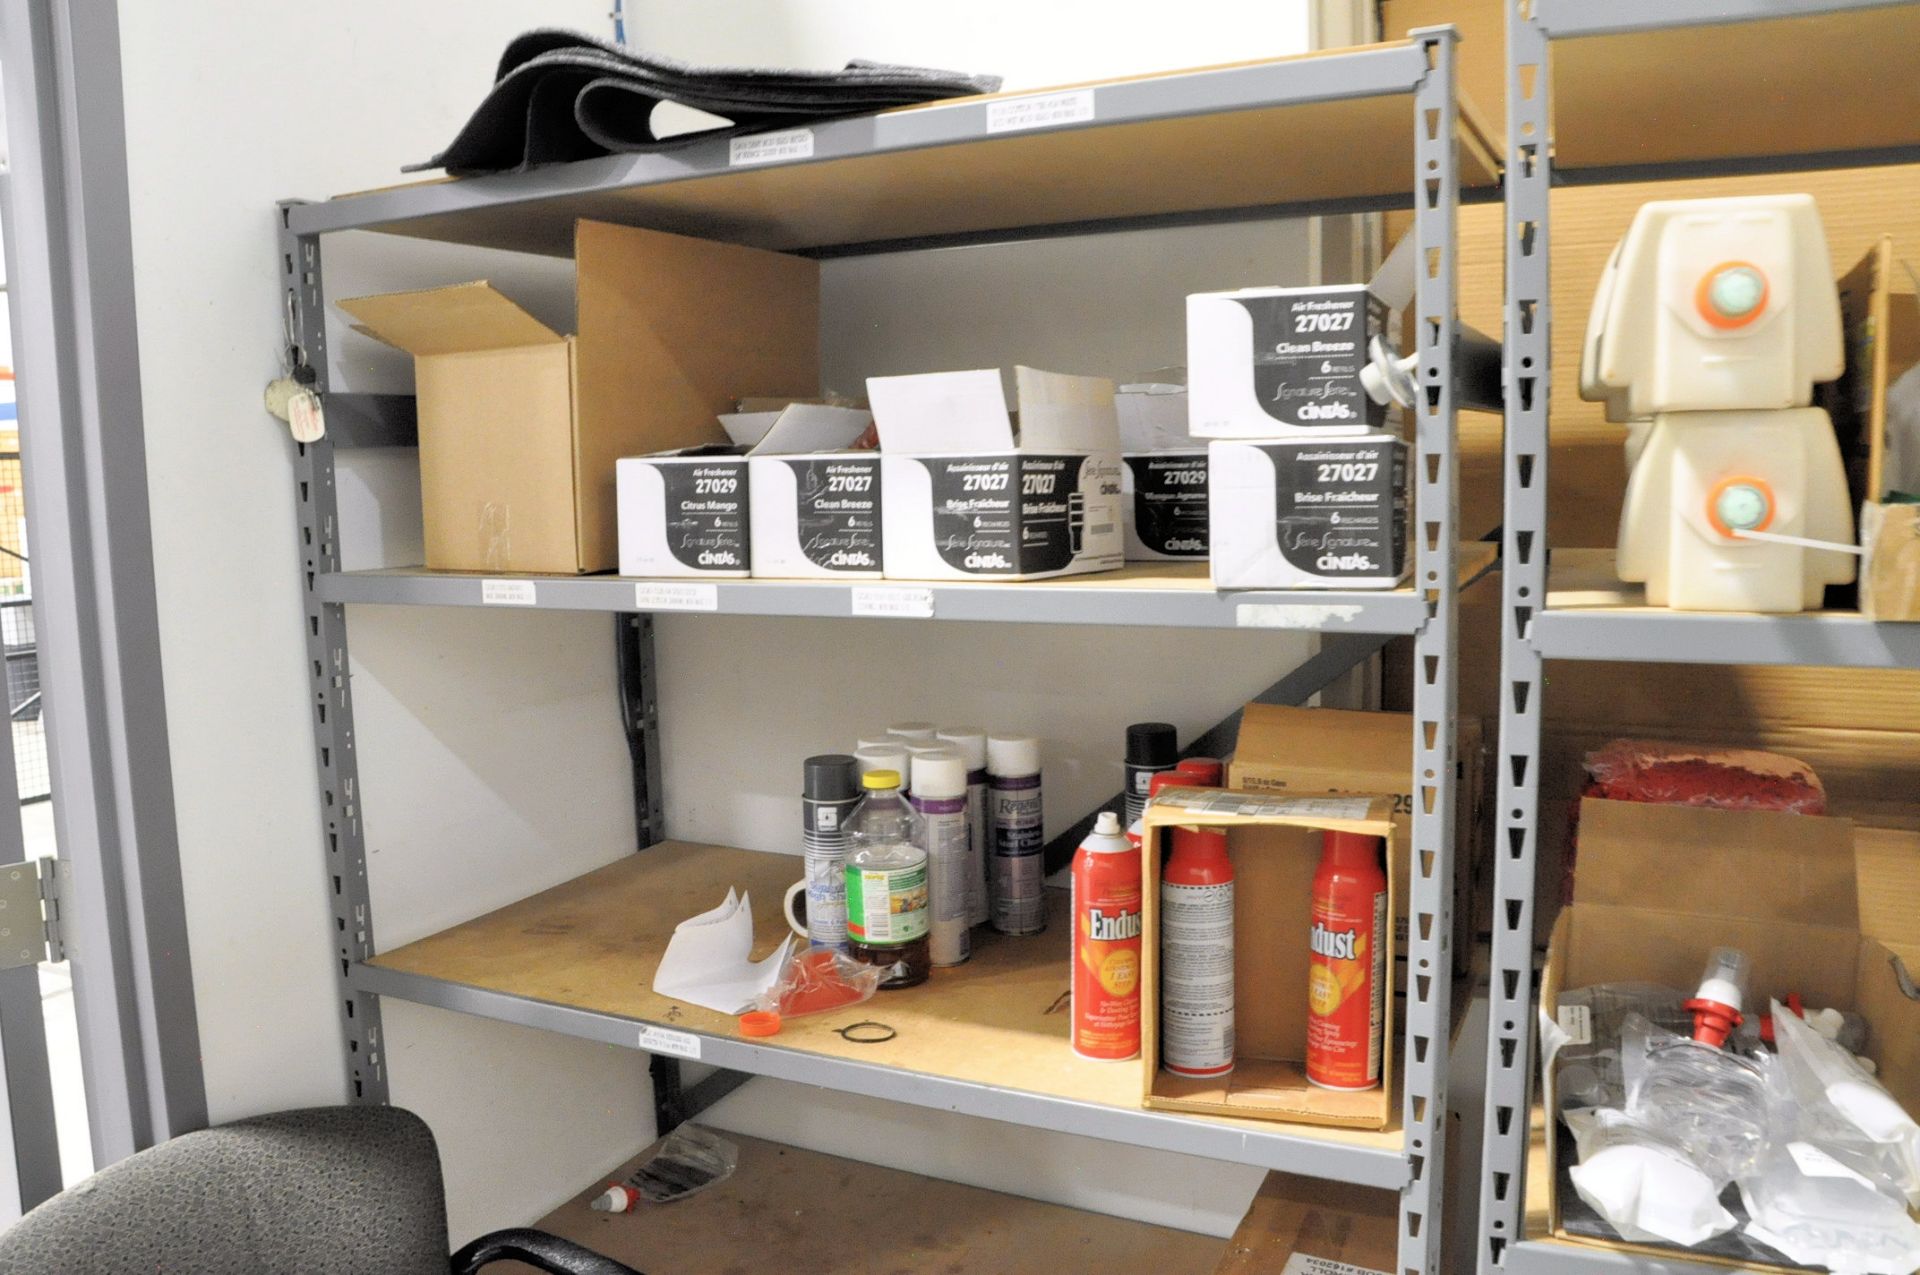 Lot-Various Janitorial Supplies with 4-Sections Shelving in (1) Storeroom - Image 4 of 8